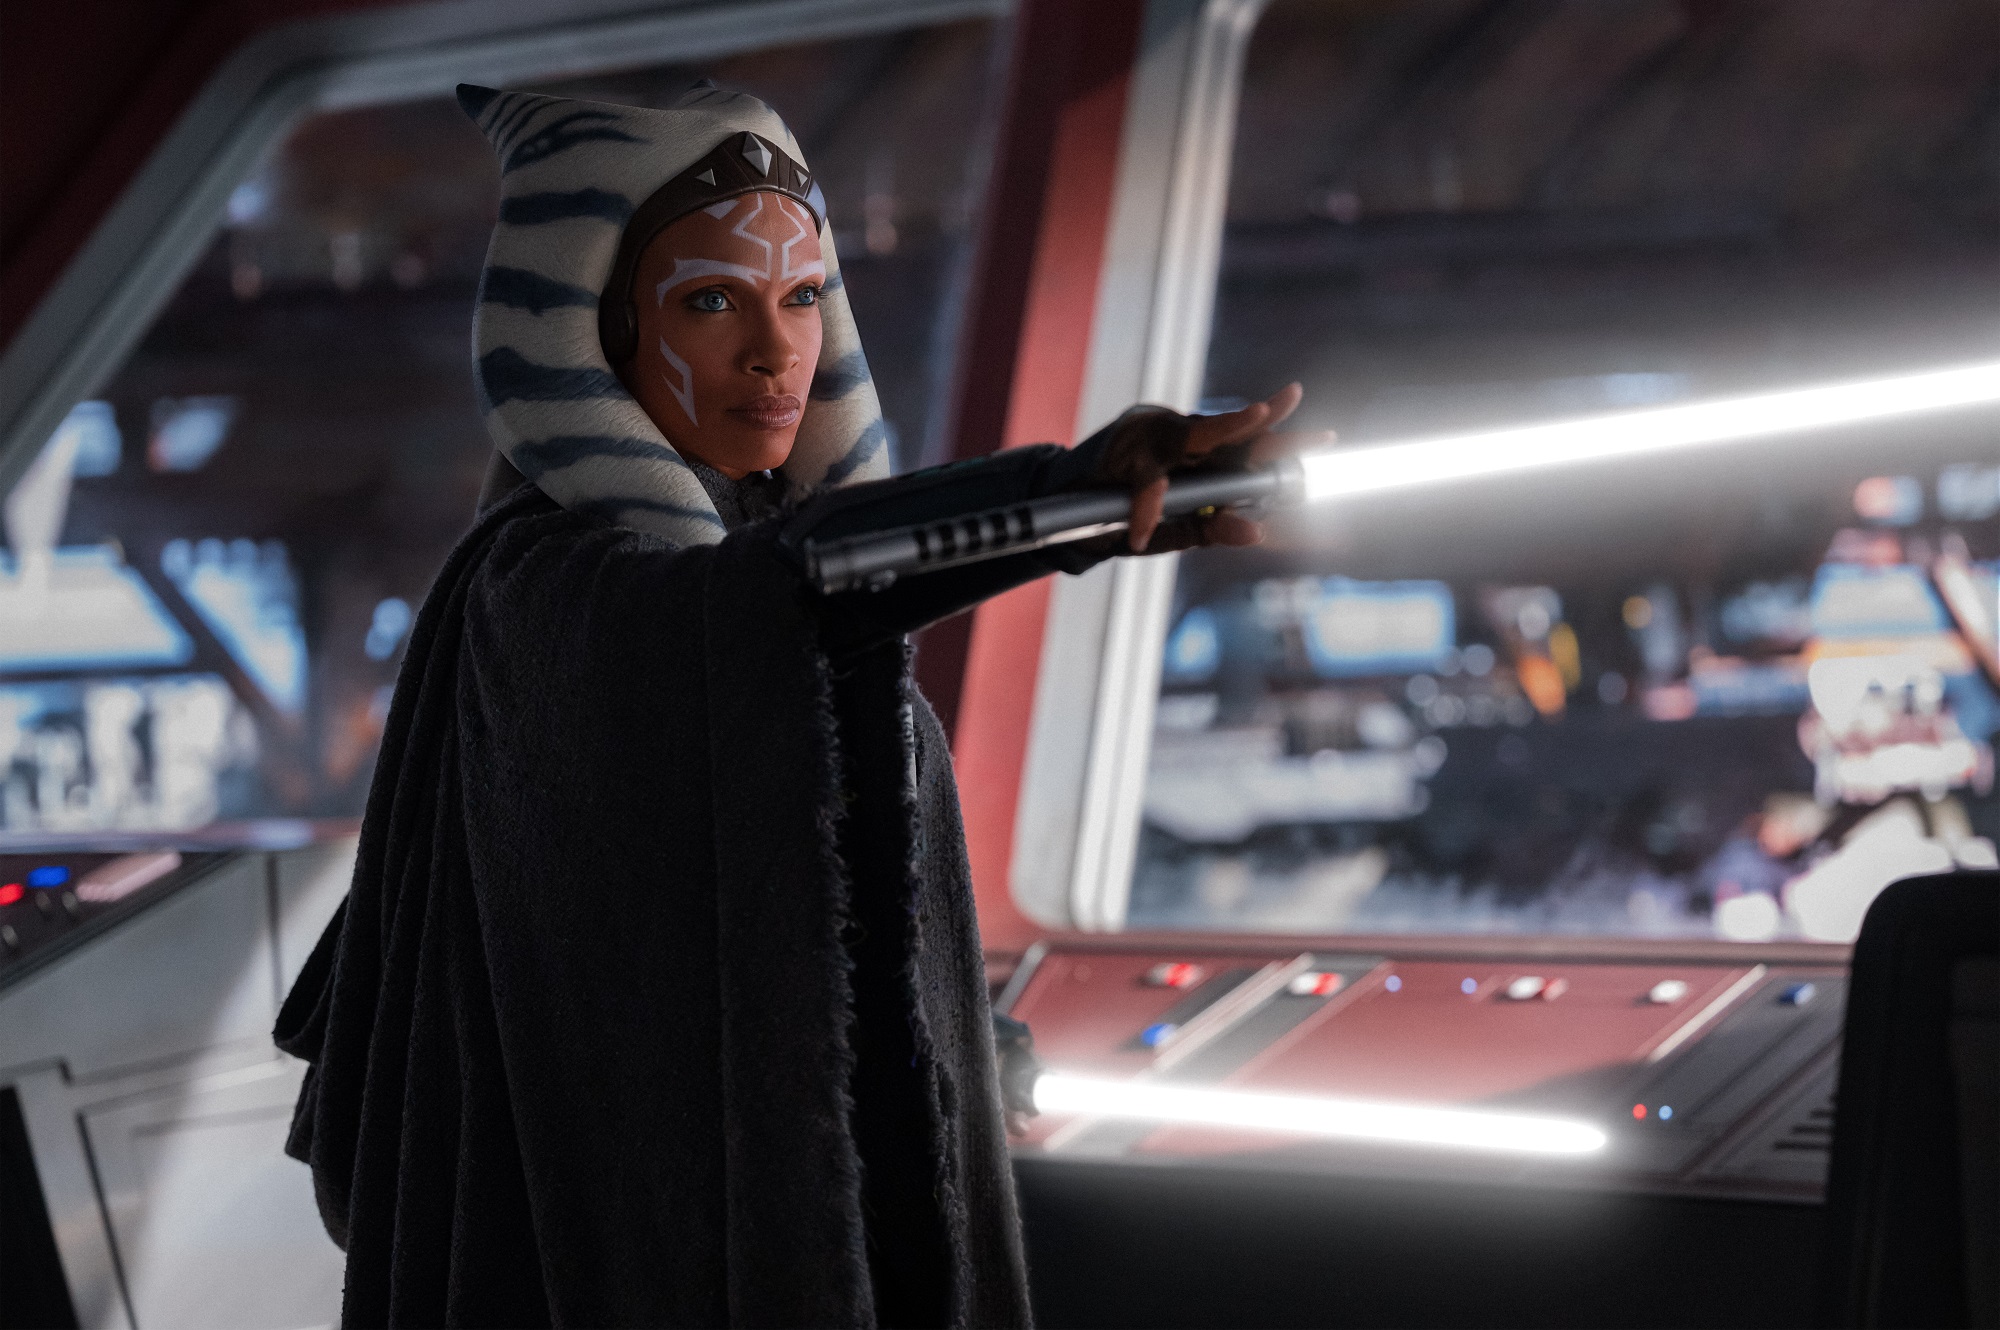 Ahsoka Release Date, Cast, Plot - Everything We Know About The Mandalorian  Spinoff